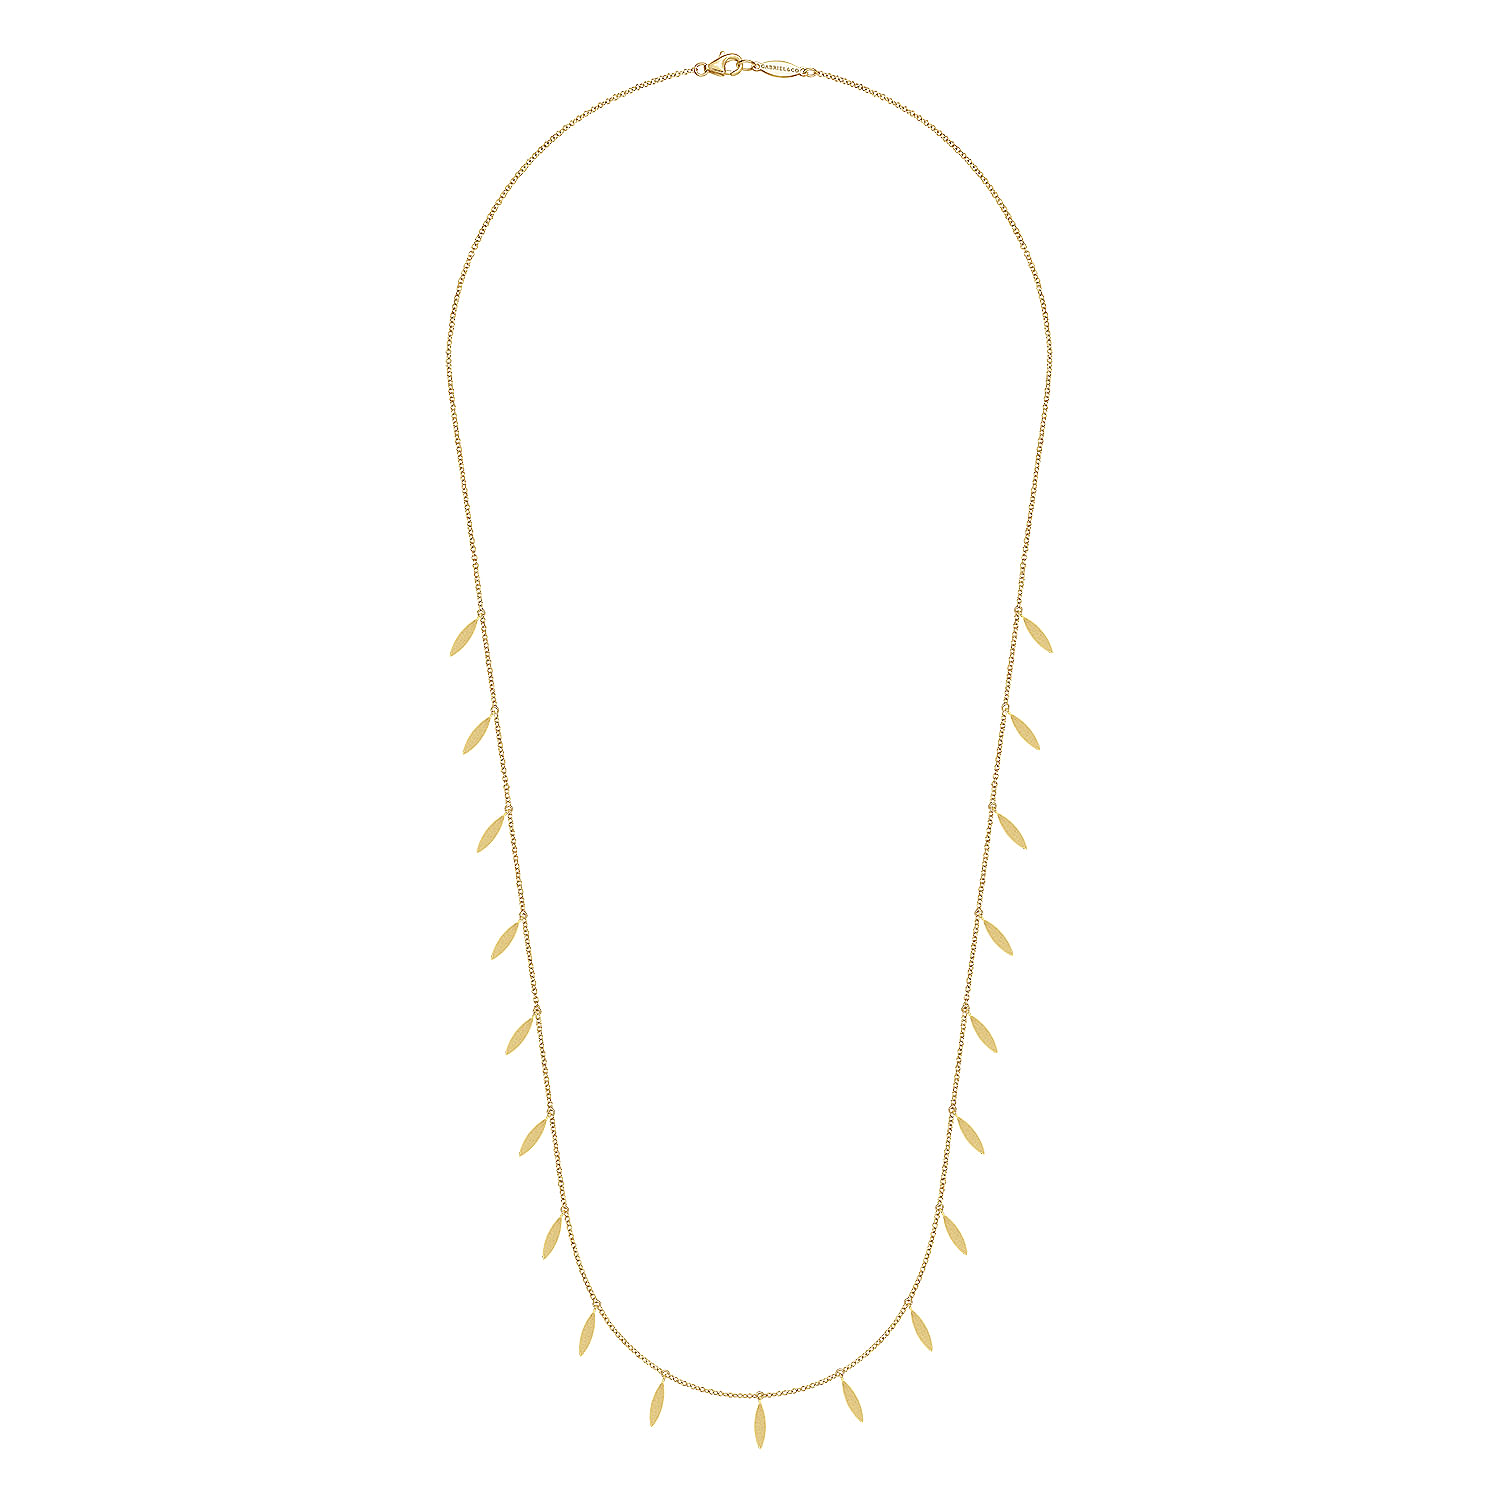 24 inch 14K Yellow Gold Chain Necklace with Marquise Shaped Drops